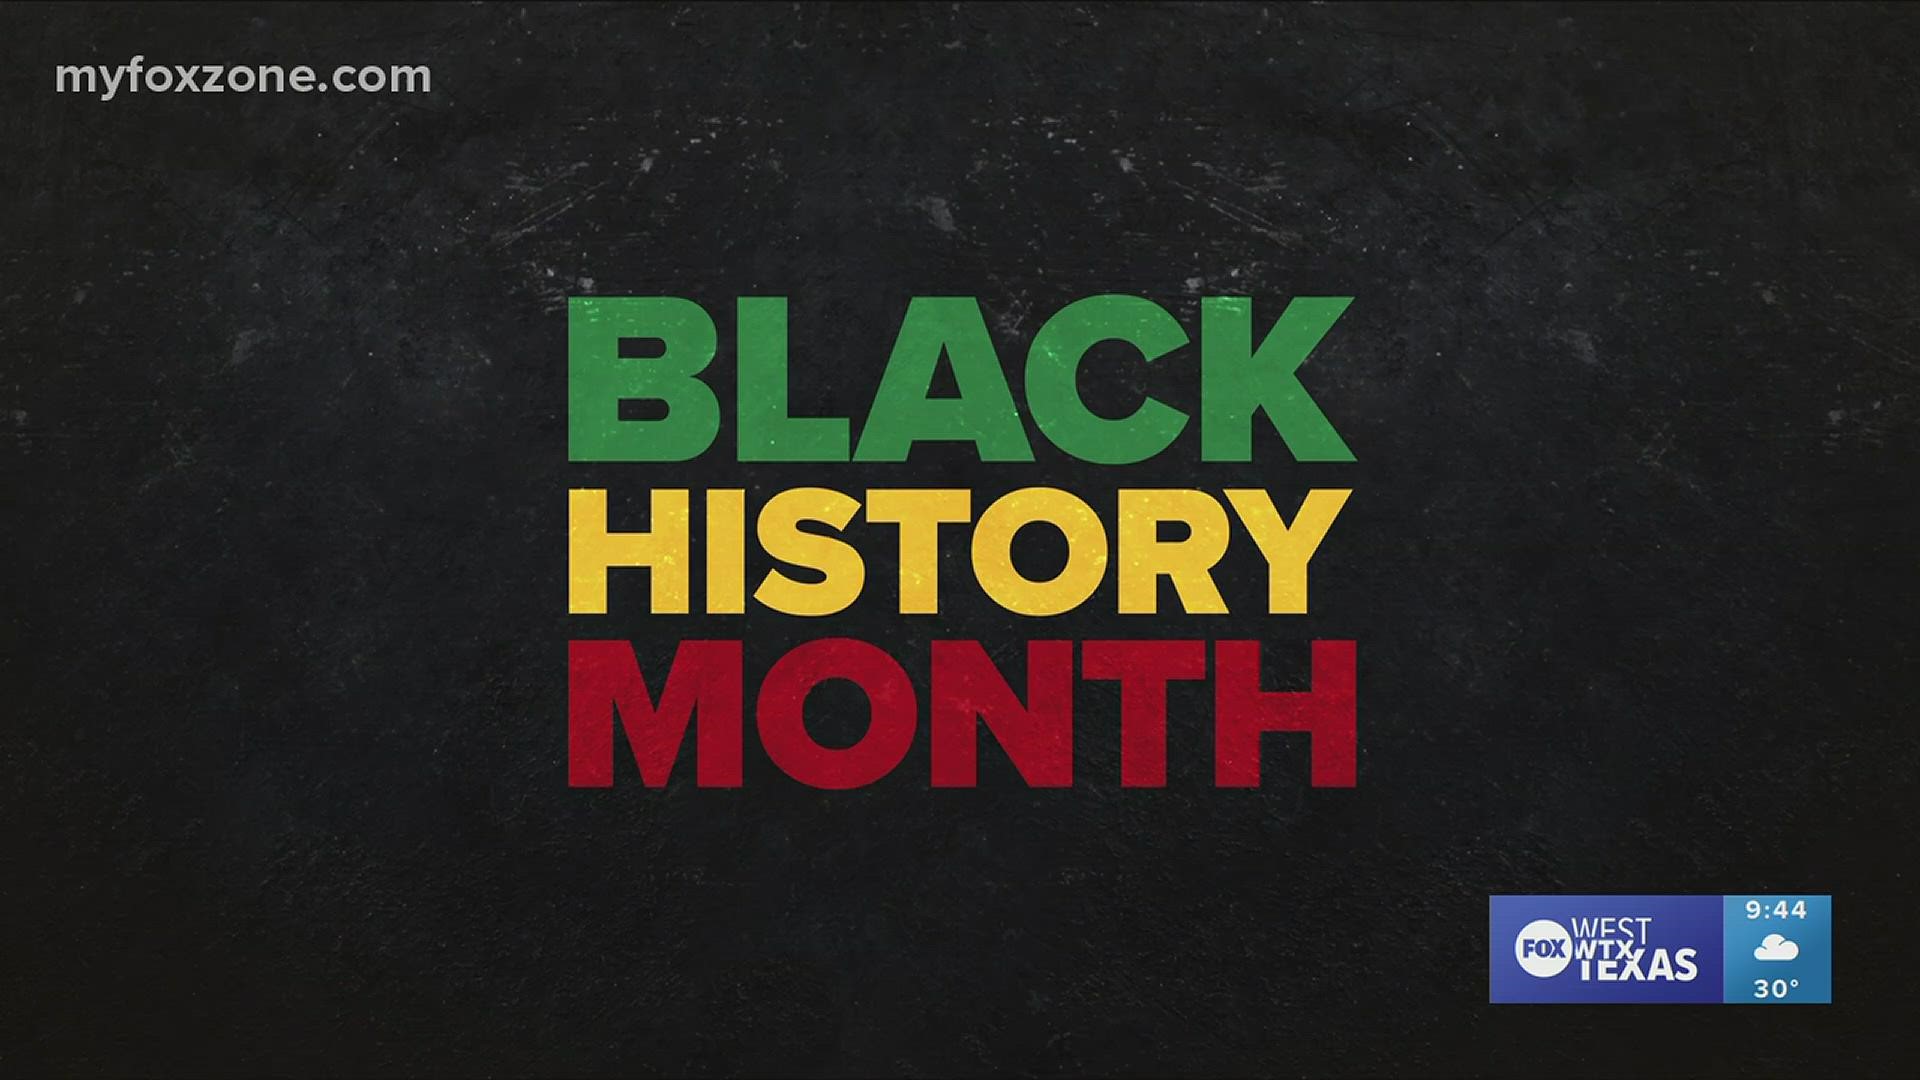 Facts on Black History Month.